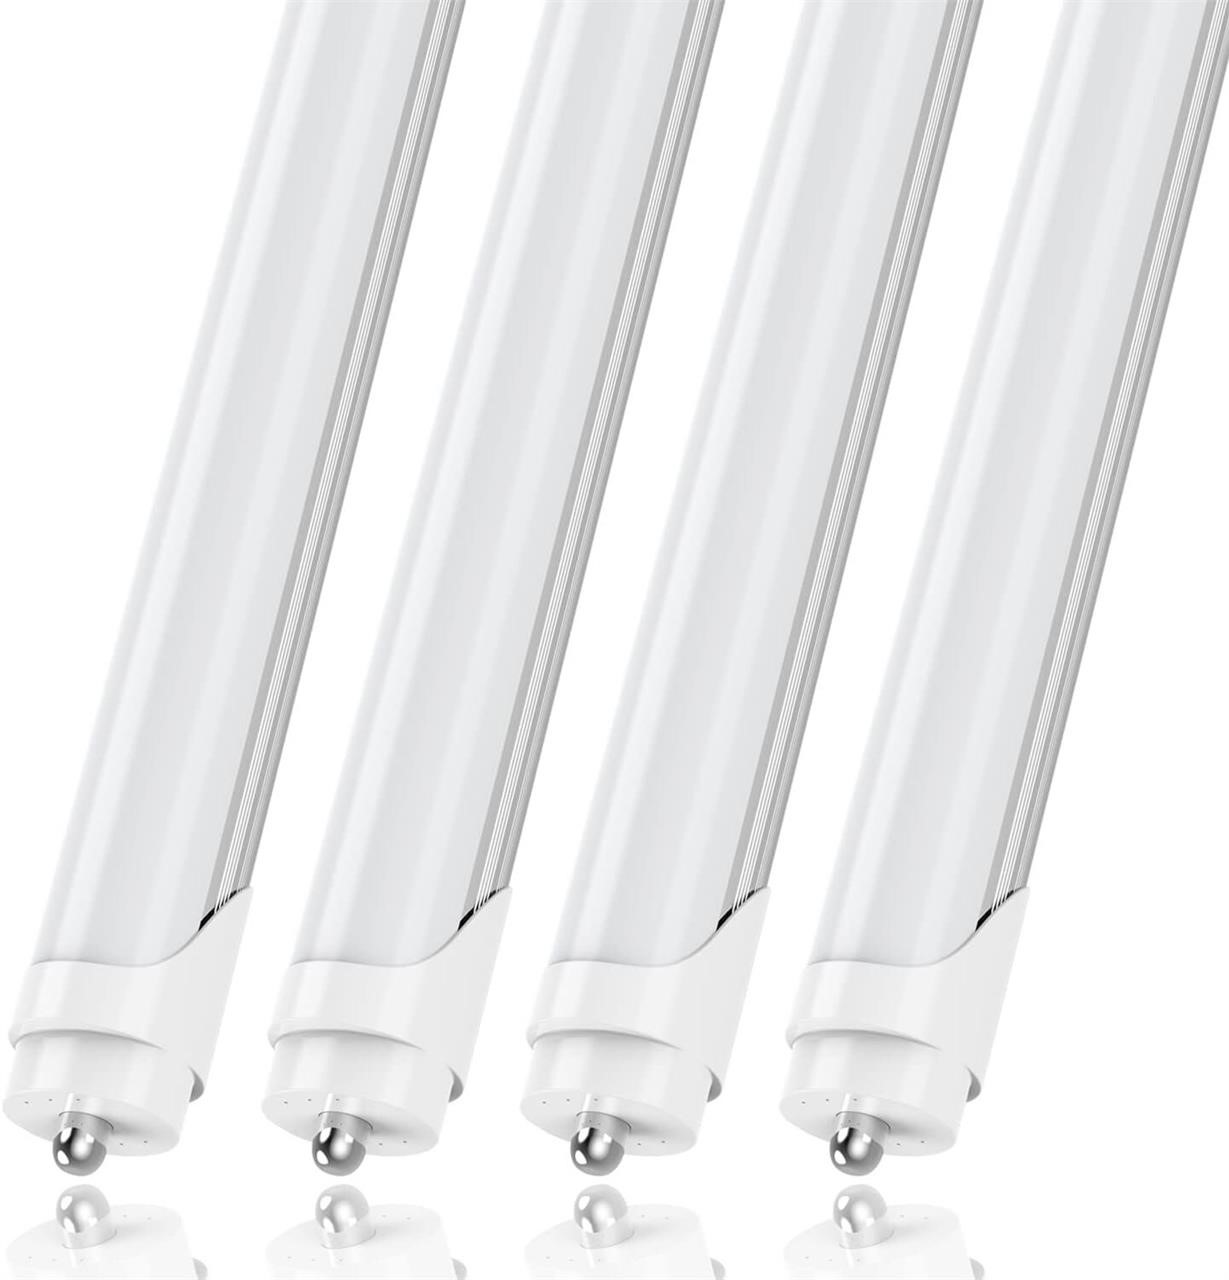 CNSUNWAY 8FT LED Bulbs  45W - Frosted 4 Count